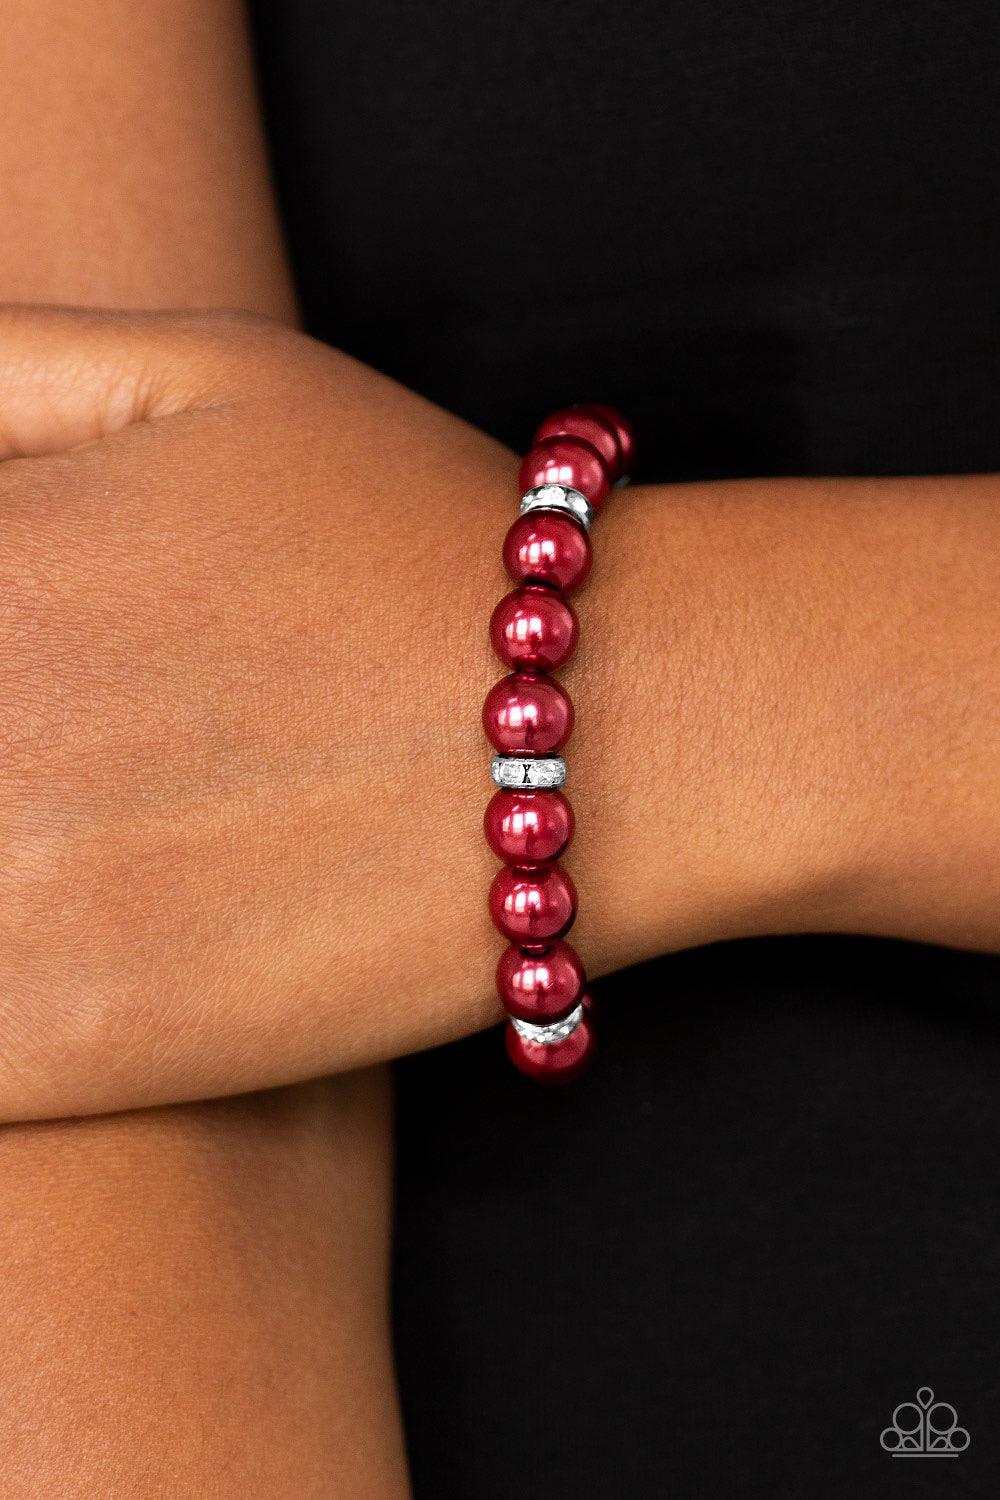 Paparazzi Accessories Exquisitely Elite - Red Classic red pearls and glittery white rhinestone encrusted rings are threaded along a stretchy band, creating a timeless centerpiece around the wrist. Jewelry